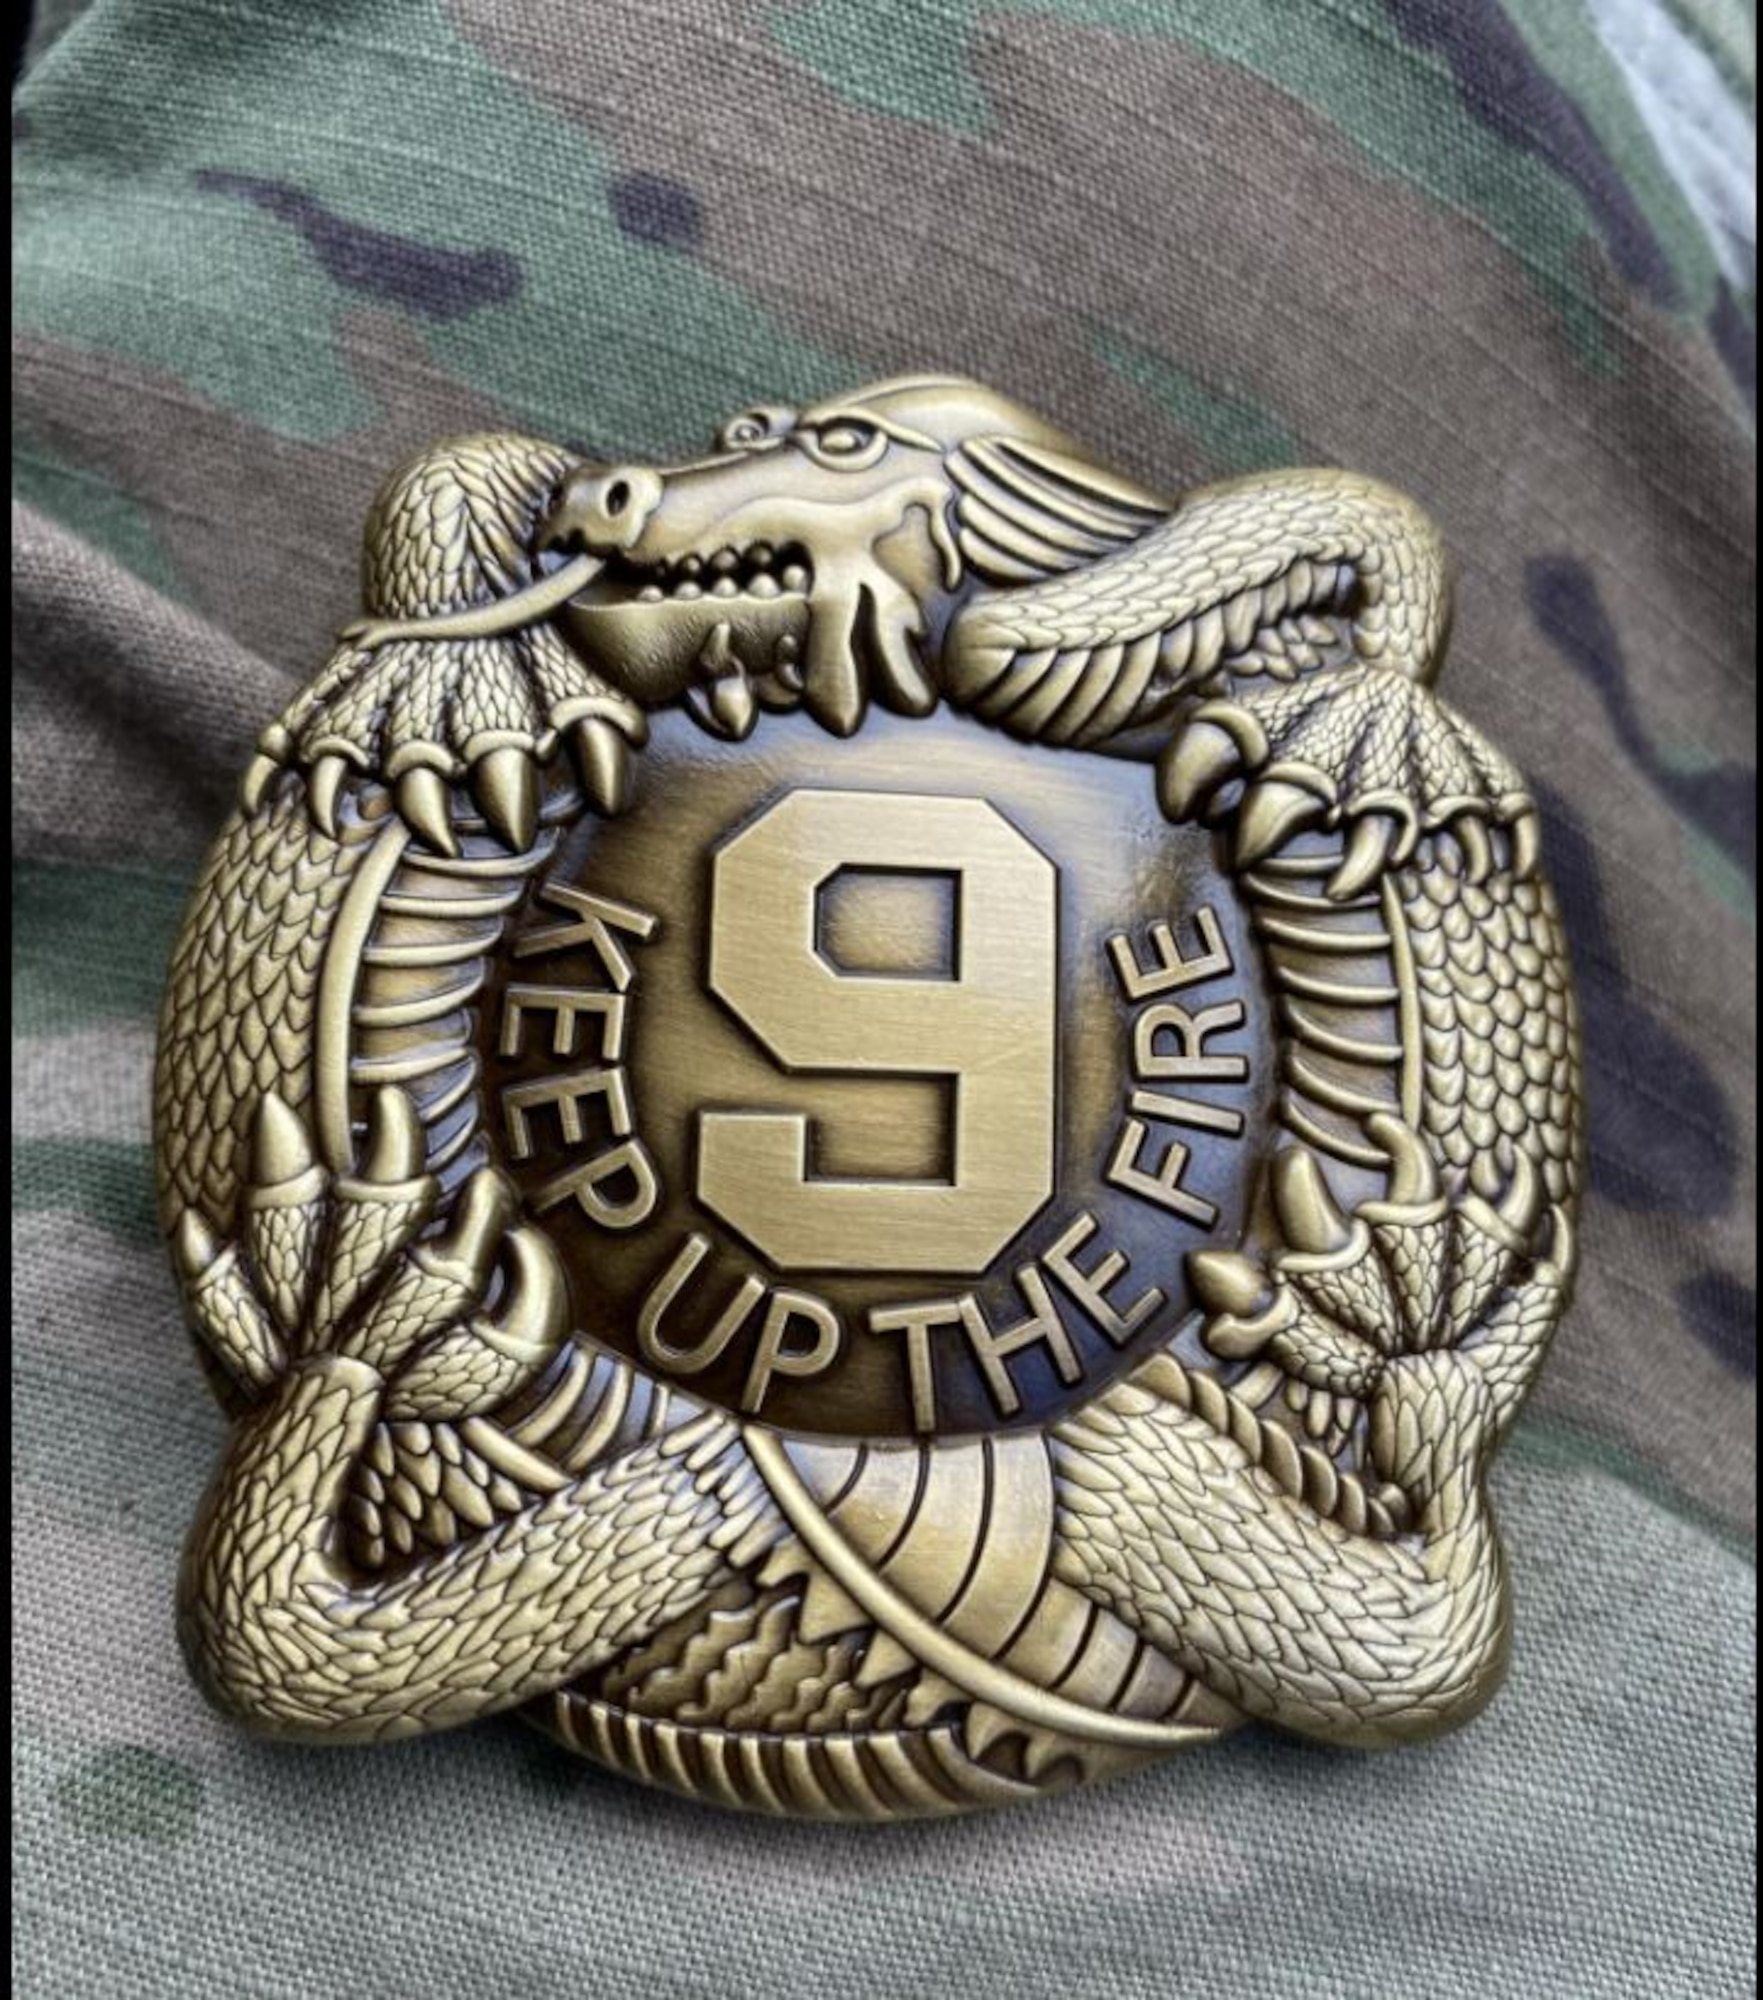 Finishers of the Manchu Mile, a 25-mile ruck march through the training areas on Fort Carson, received a decorative "Keep Up the Fire" belt buckles after crossing the finish line Oct. 27, 2023. The ruck march paid homage to the 4th Battalion, 9th Infantry Regiment’s 87-mile forced march during the Chinese “Boxer Rebellion” in the early 1900s. (Courtesy photo provided by U.S. Space Force Sgt. Stephen Lemmons)